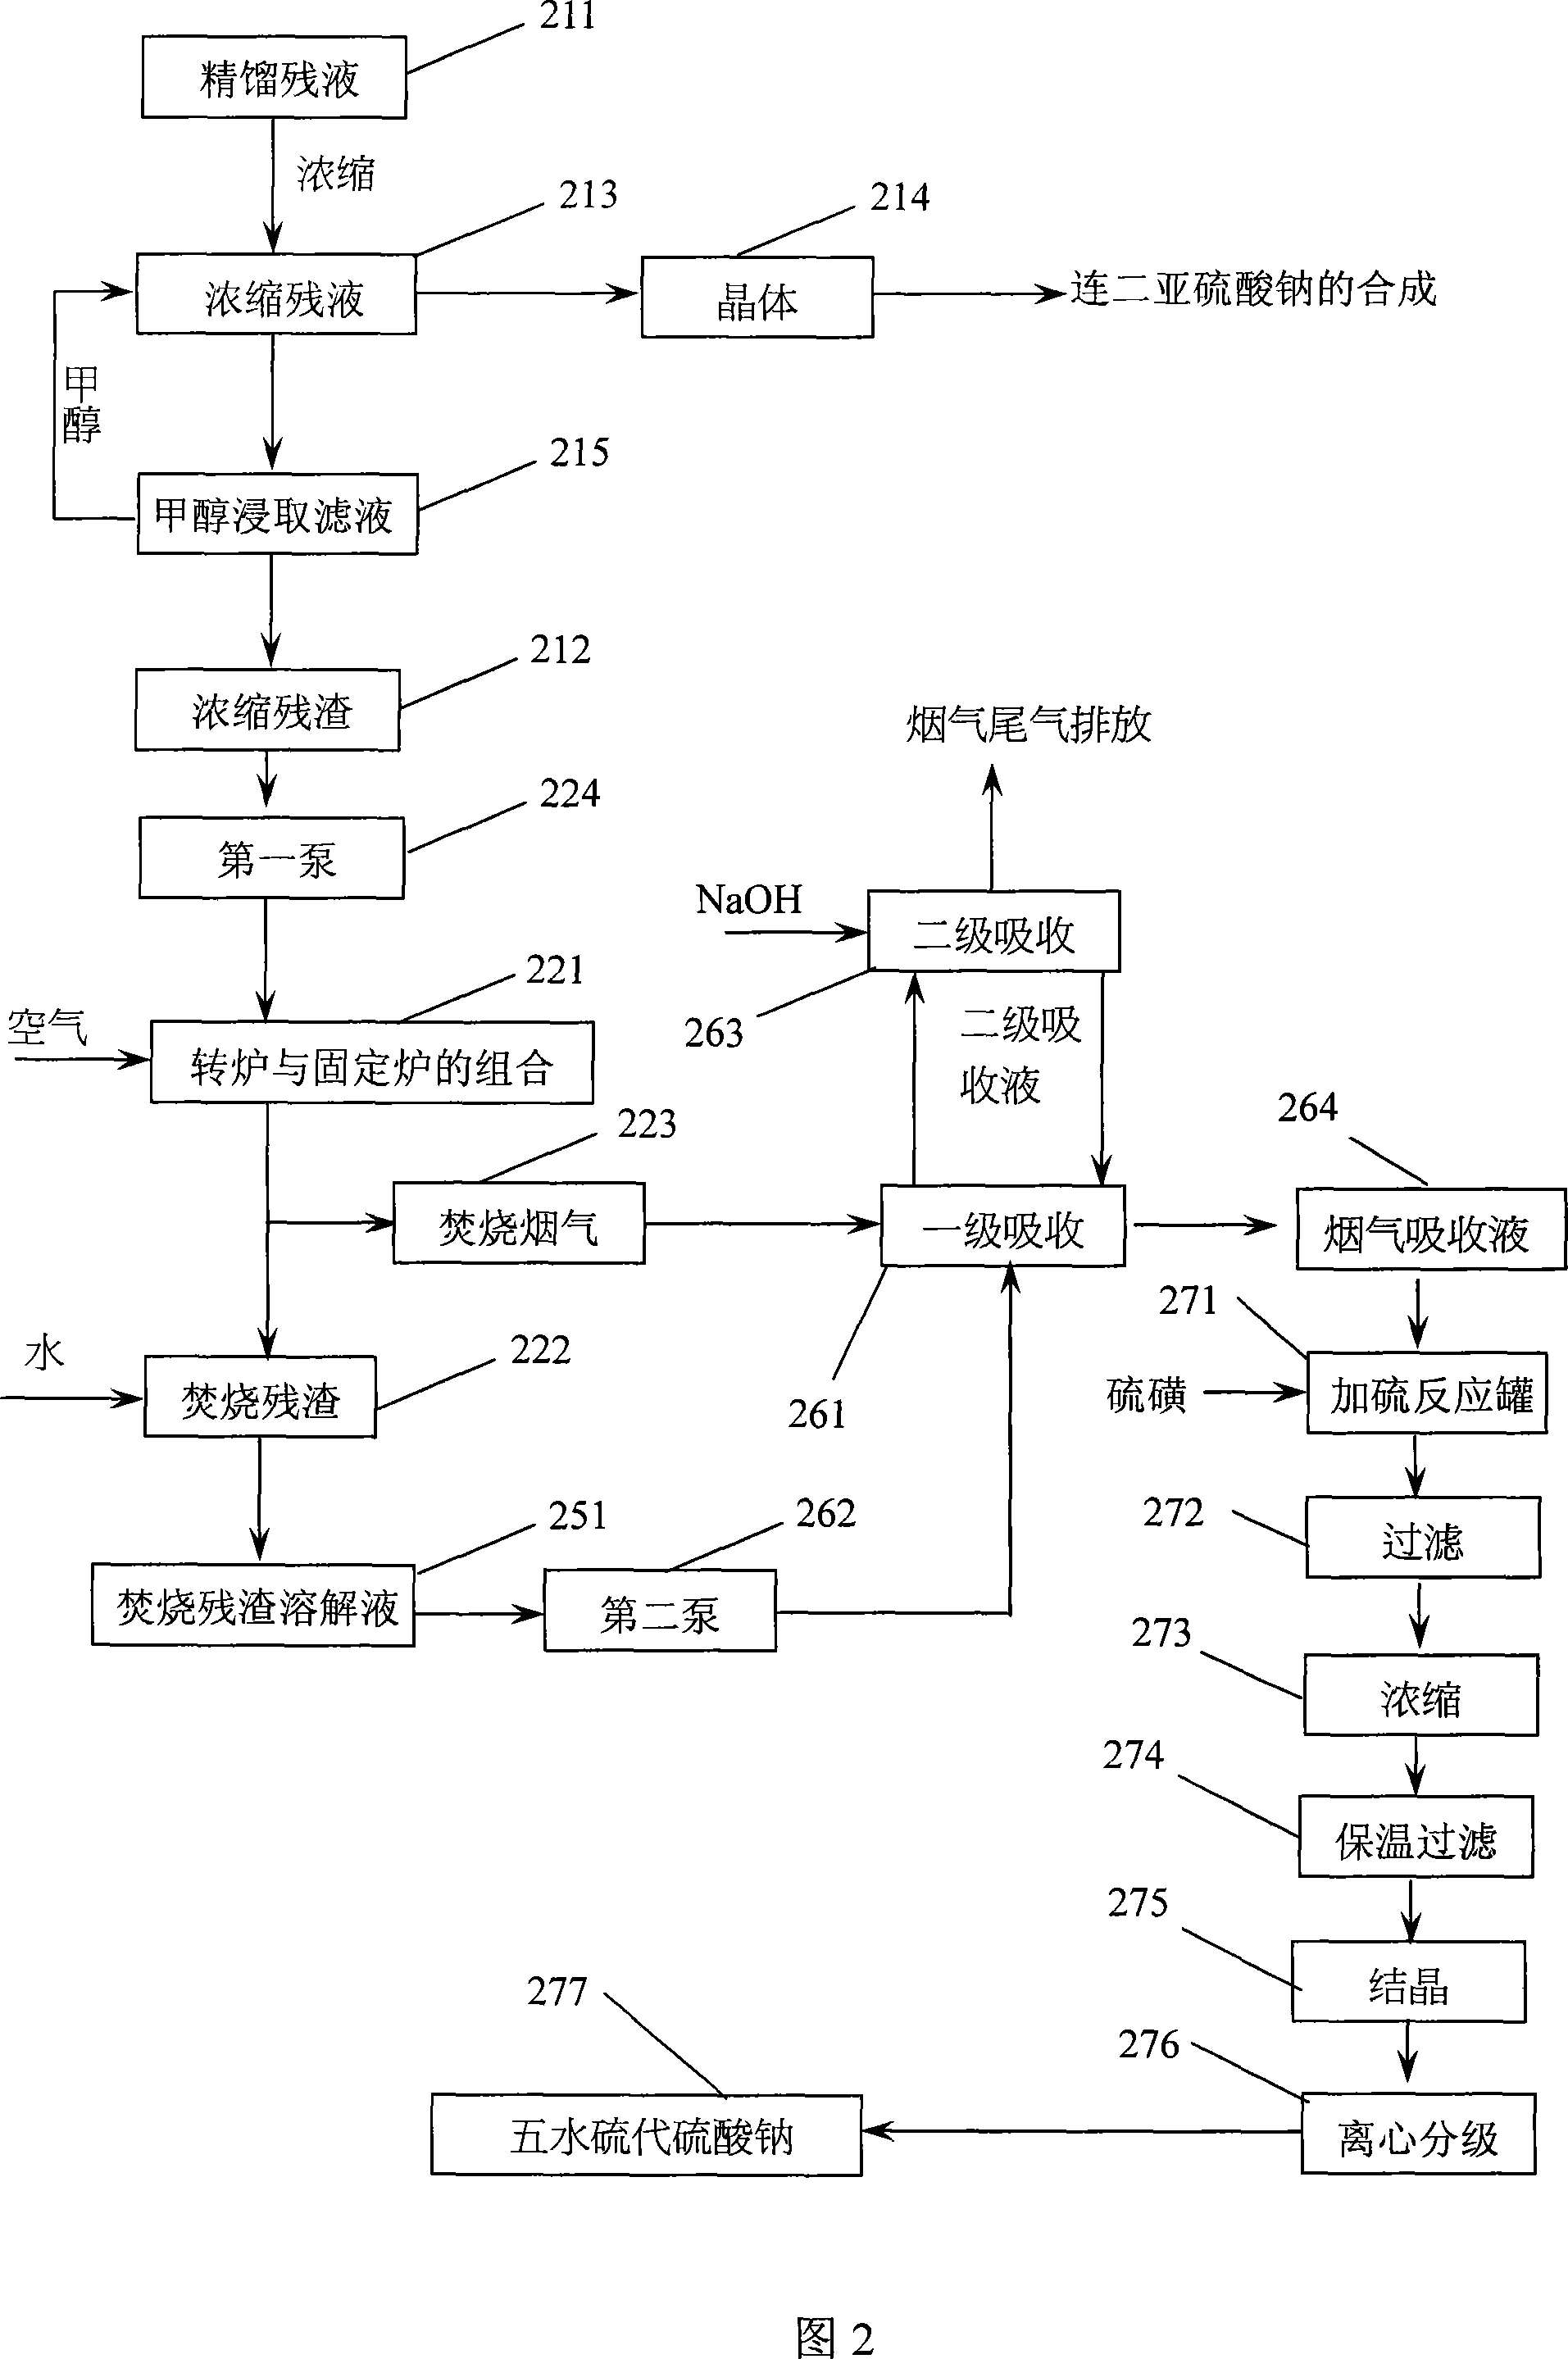 Method for treating residual liquid after mother liquor distillation methanol recovery during production of sodium sulphoxylate by sodium formate process